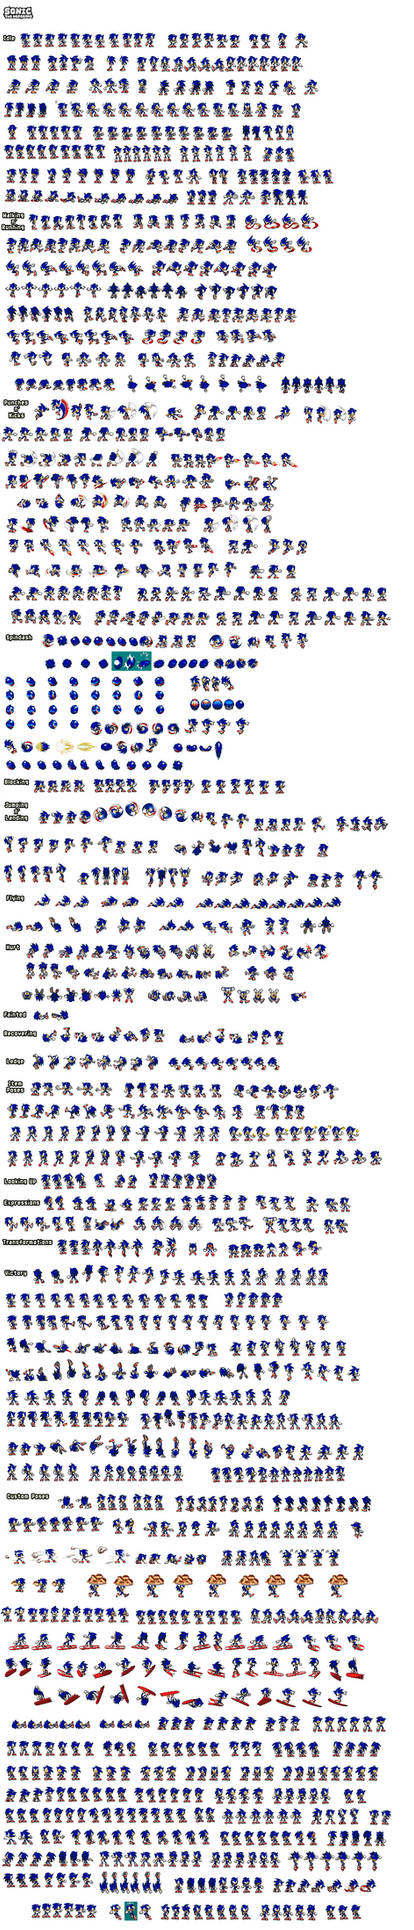 Sonic Classic Modern Mix Ultimate Sprite Sheet png